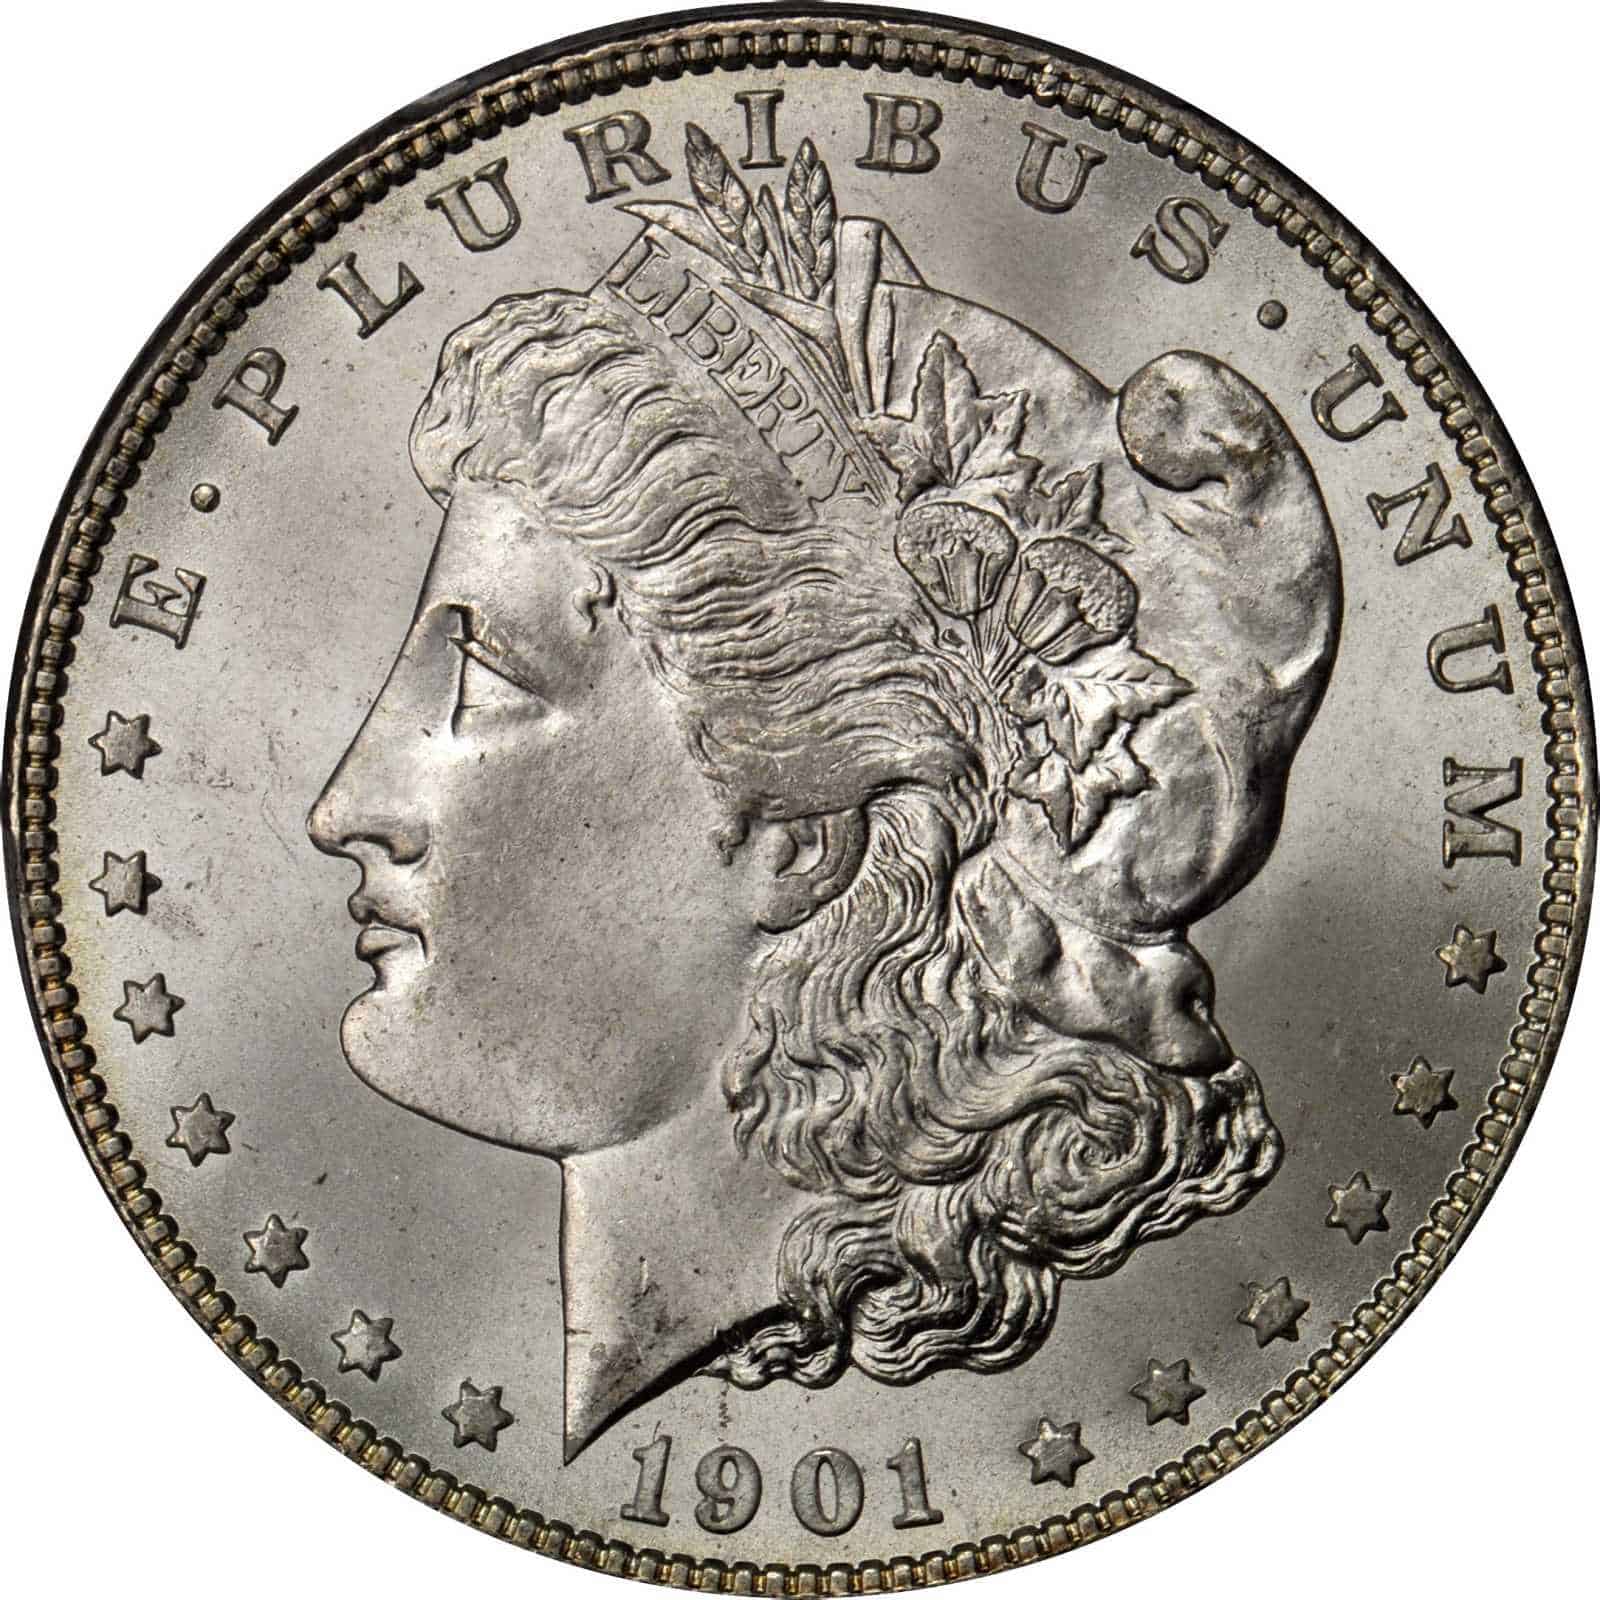 The Obverse of the 1901 Silver Dollar